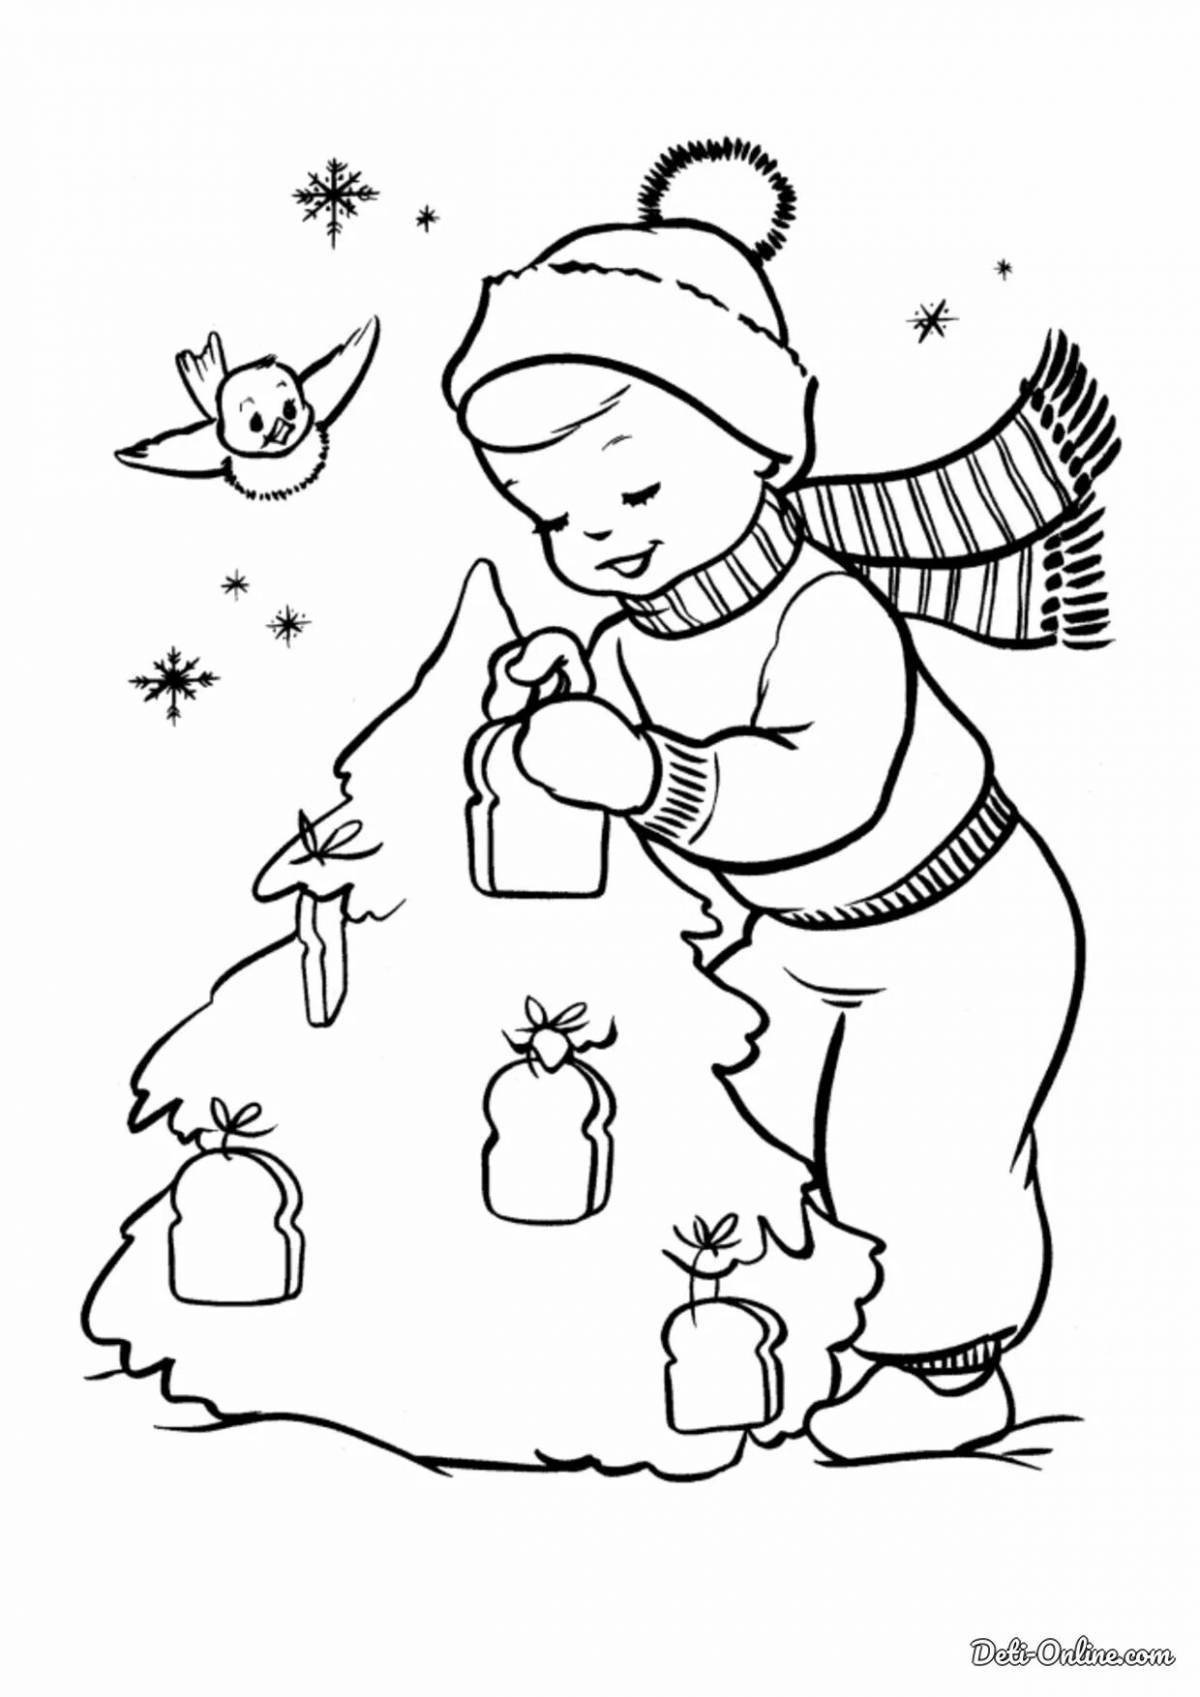 Bright winter Christmas coloring book